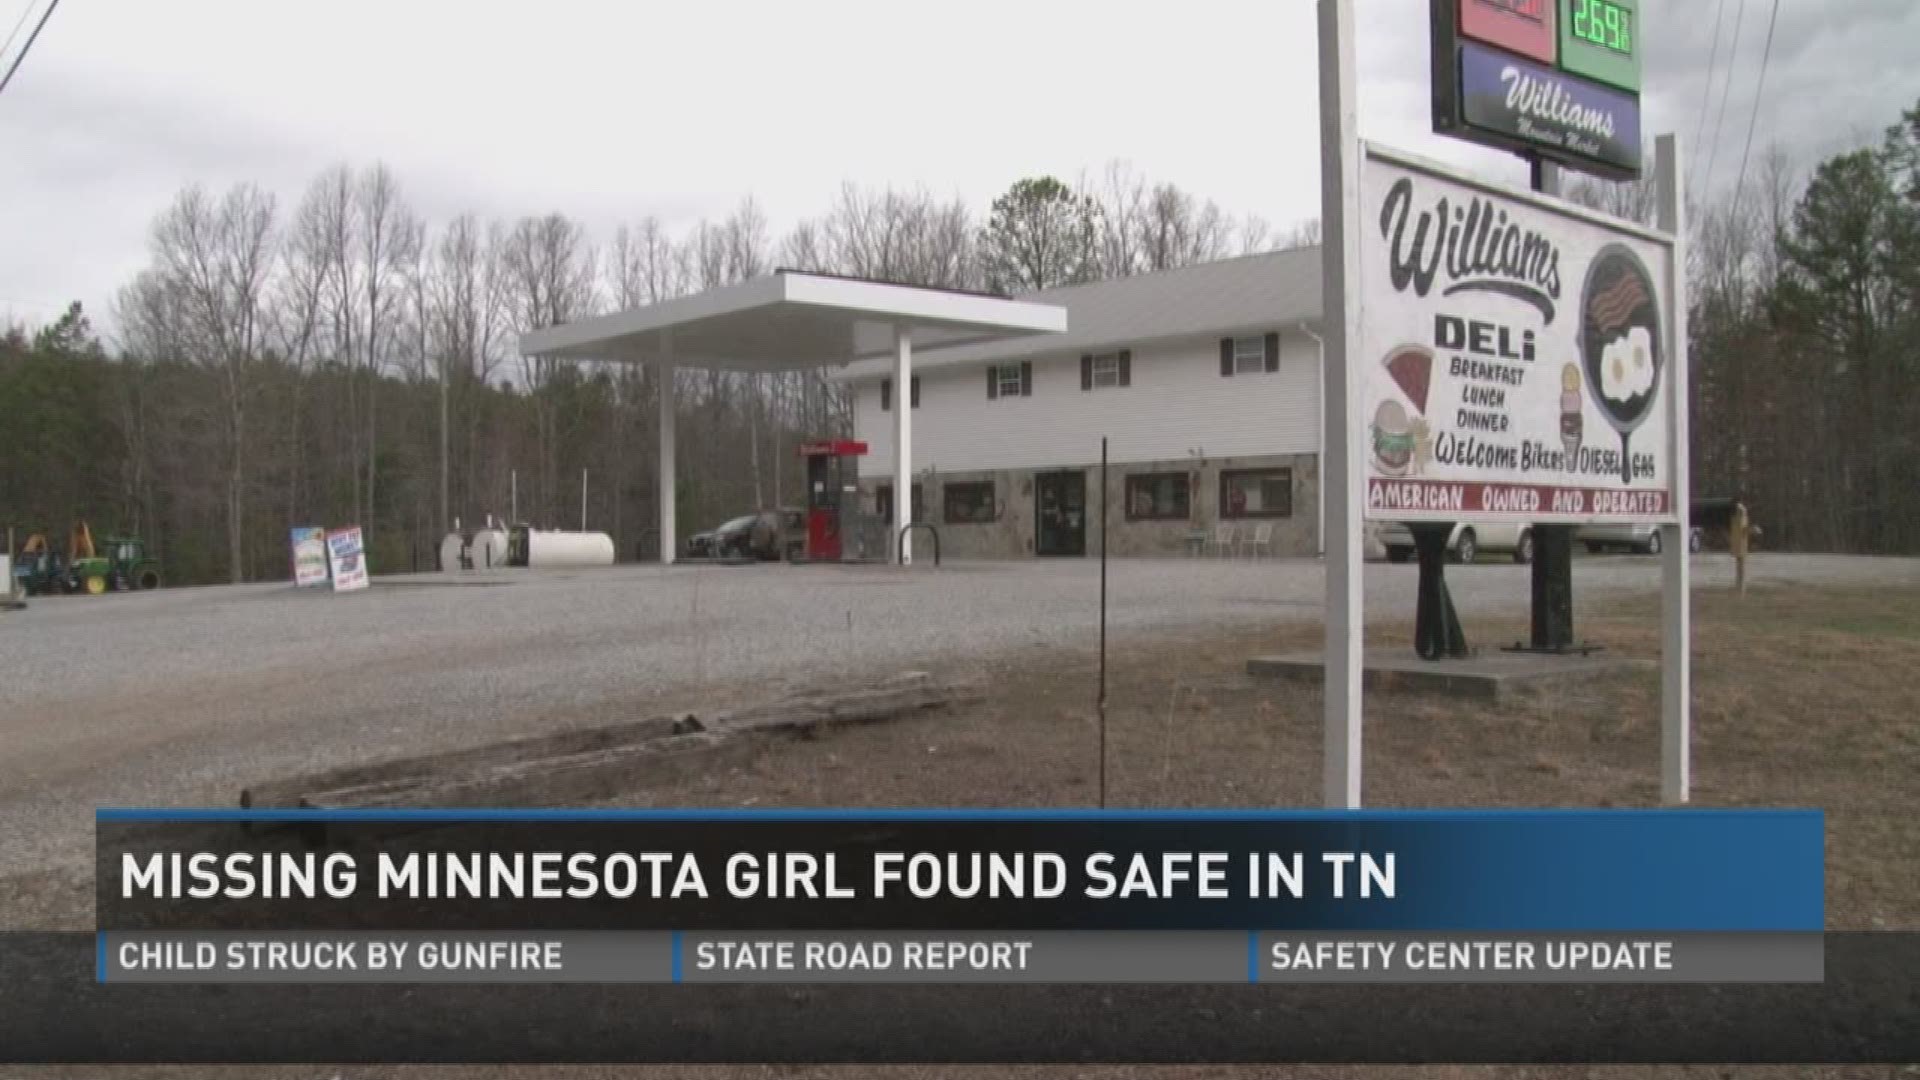 March 13, 2017: A Minnesota girl who was missing for a month was found sound Sunday afternoon in Monroe County.